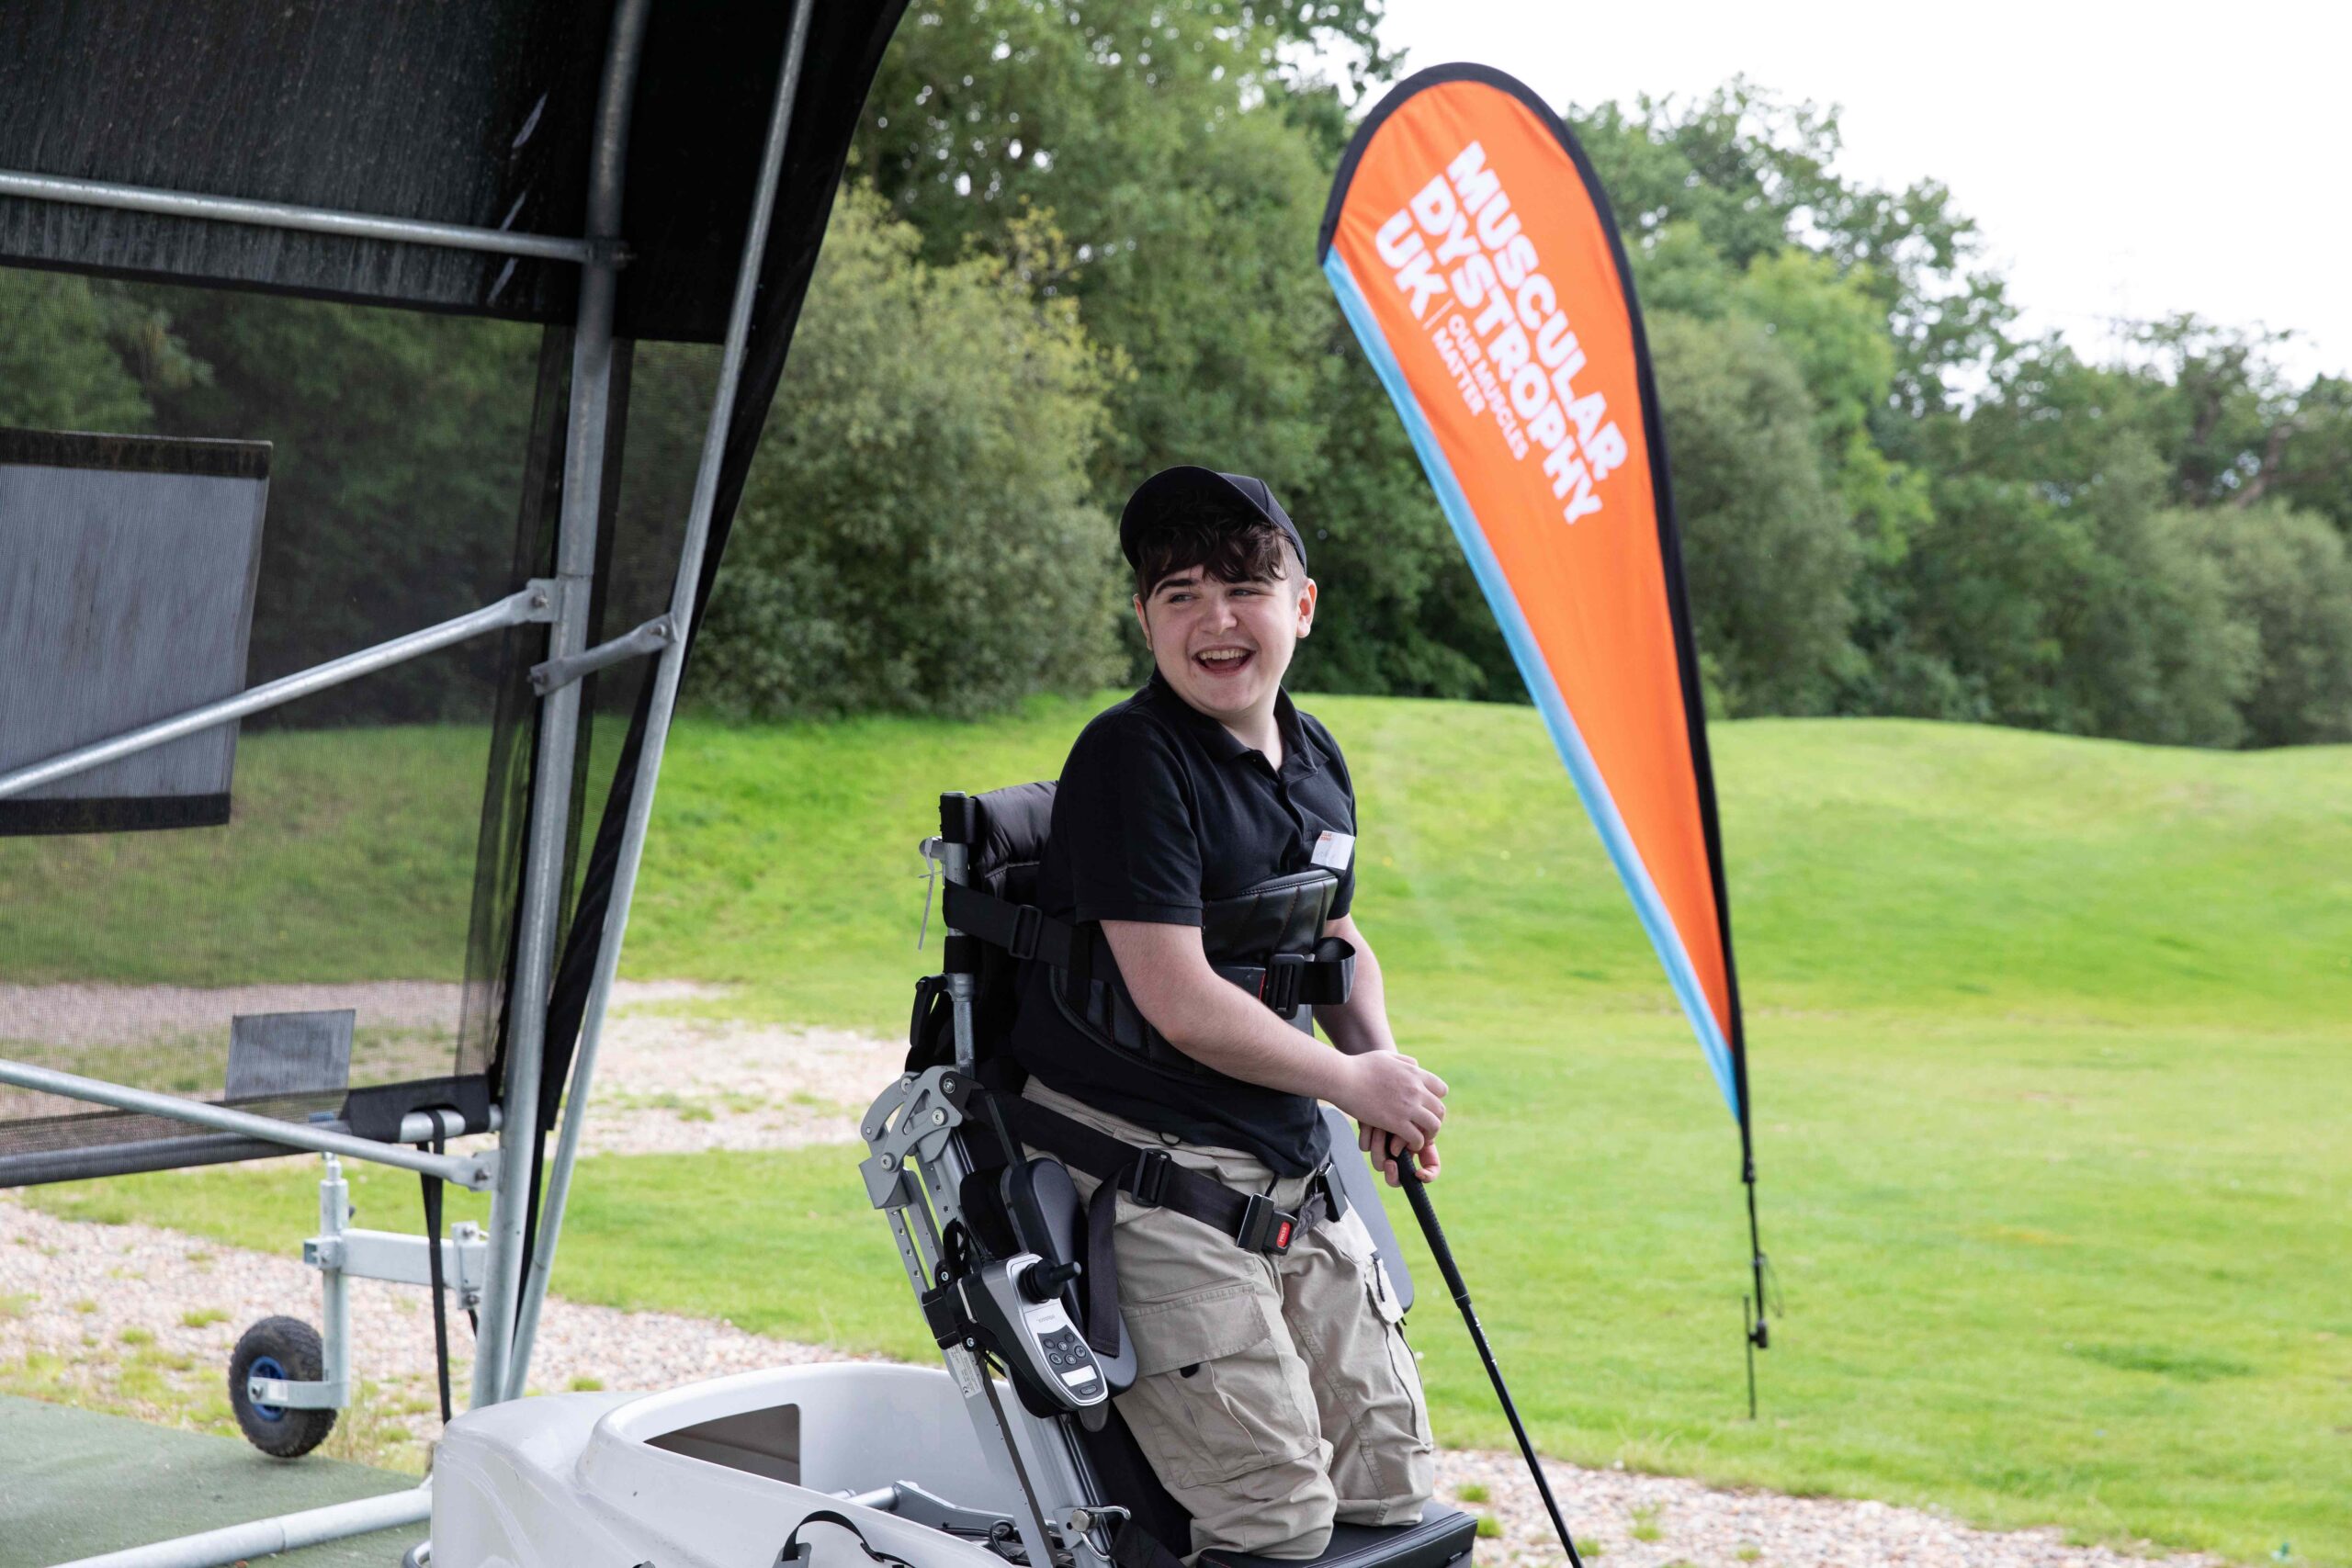 Muscular Dystrophy UKAccessible Golf Day, The Shire London